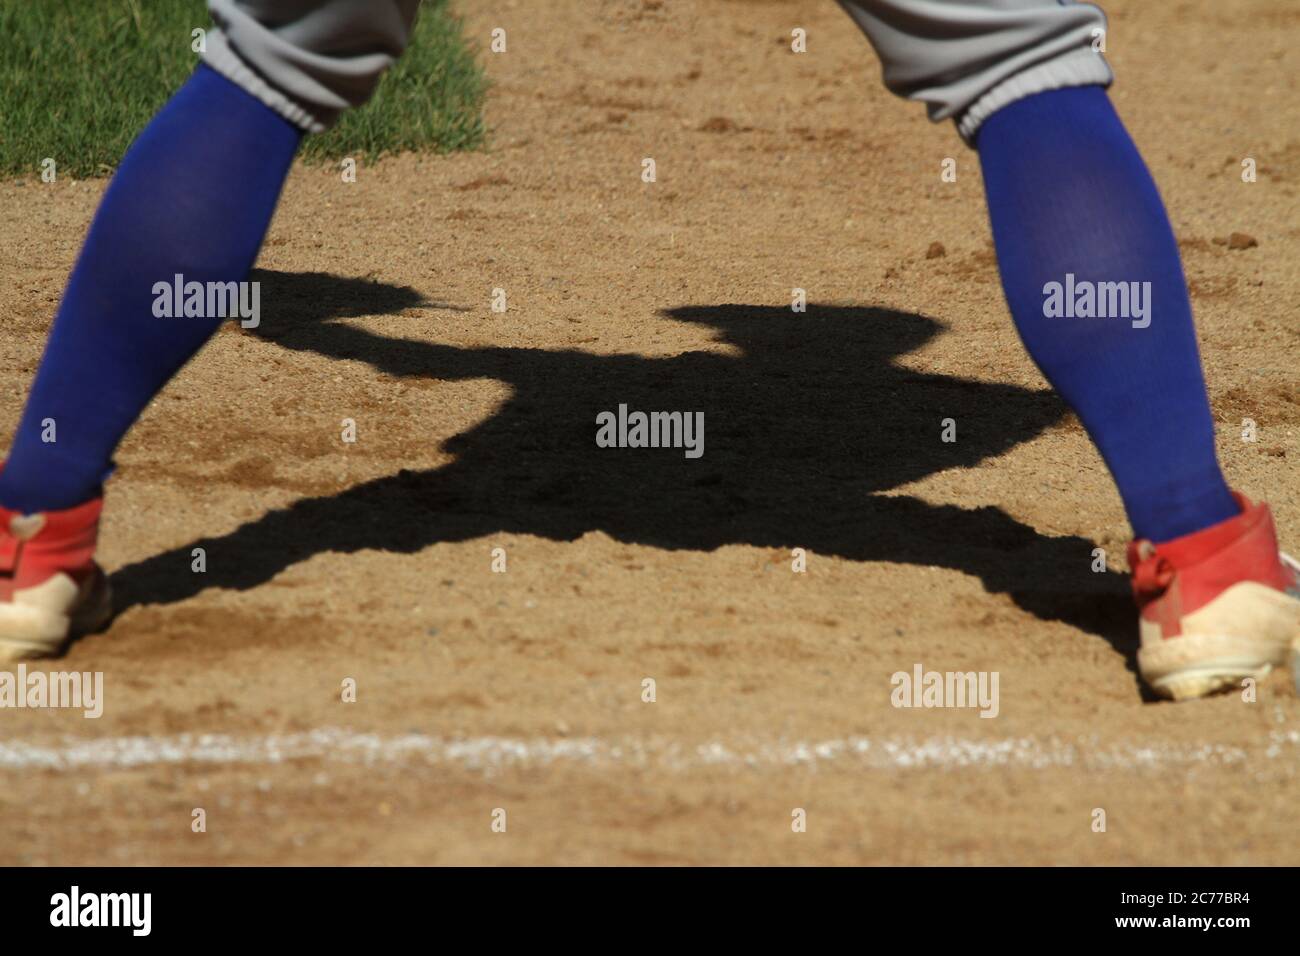 A baseball first baseman casts a shadow while covering the base for a pickoff play. Stock Photo